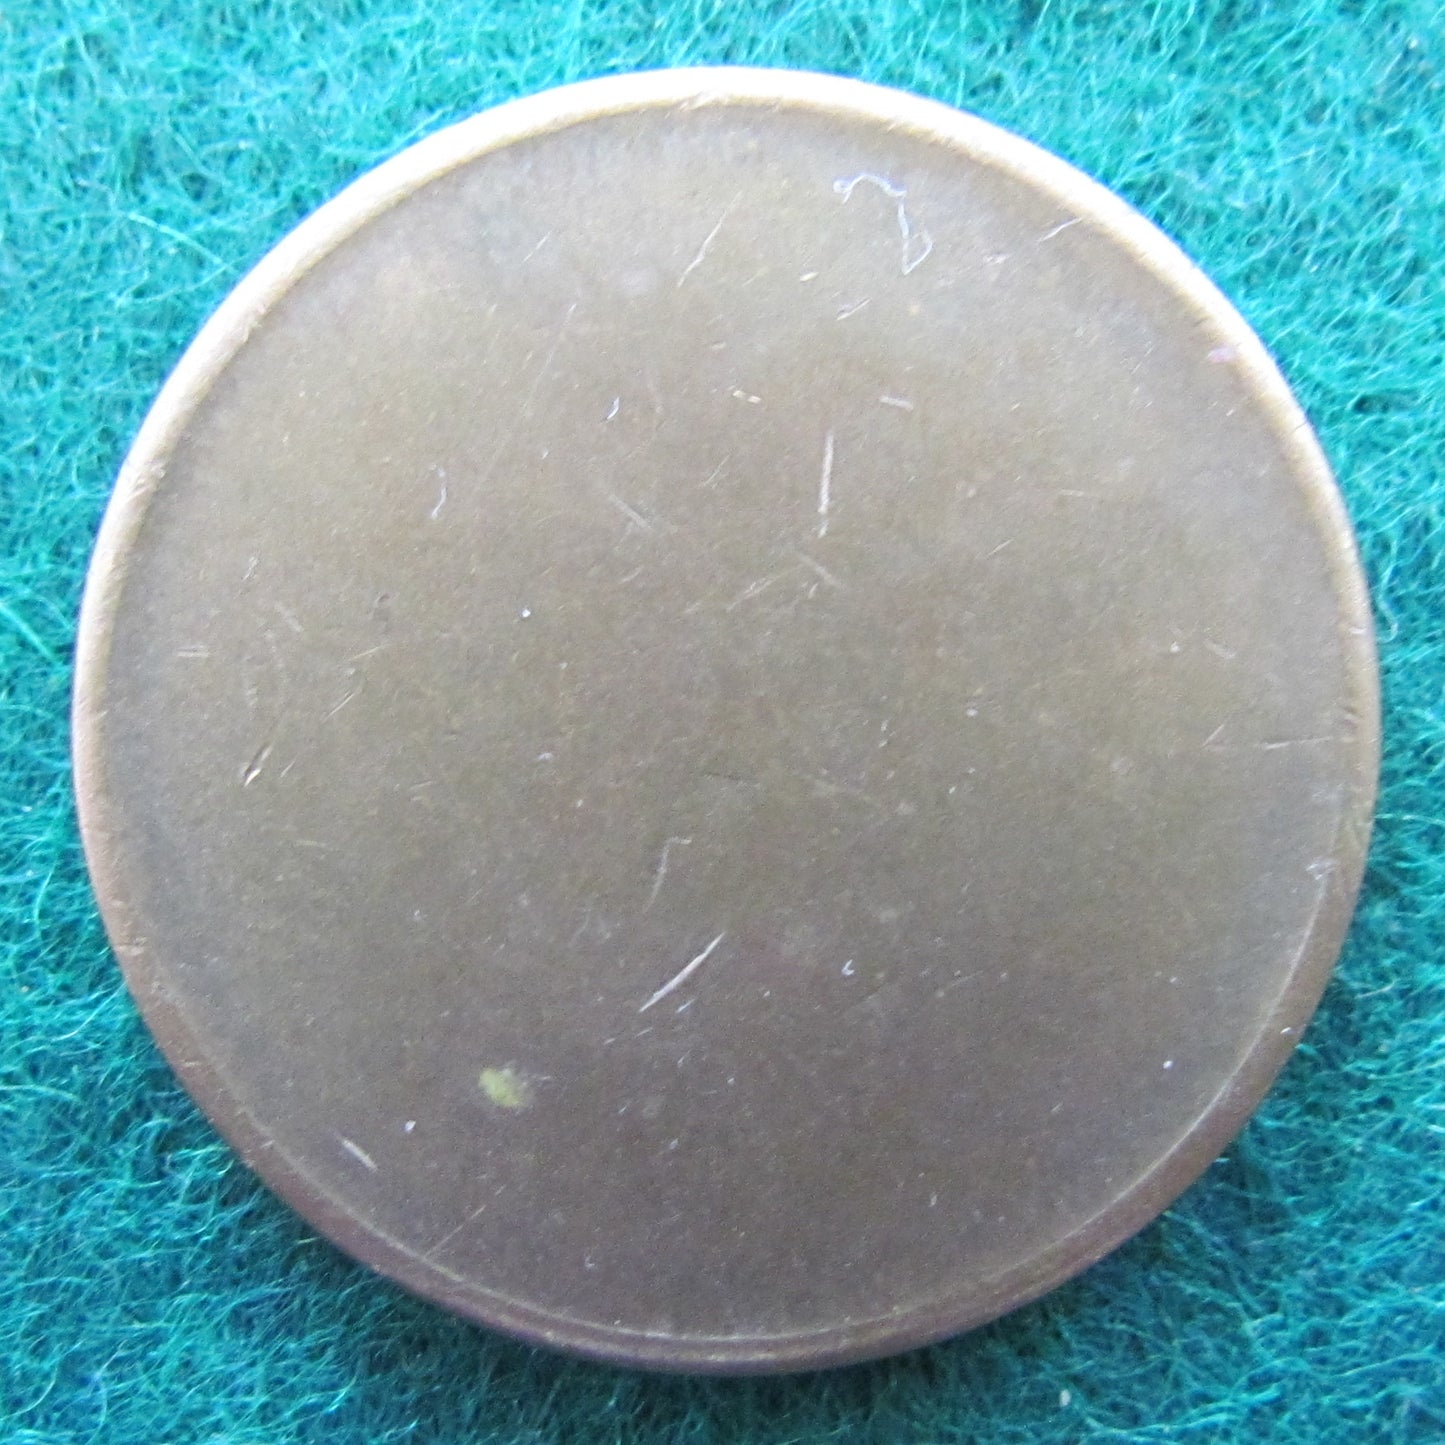 Token Blank Depicting A Wreath On The Face Side